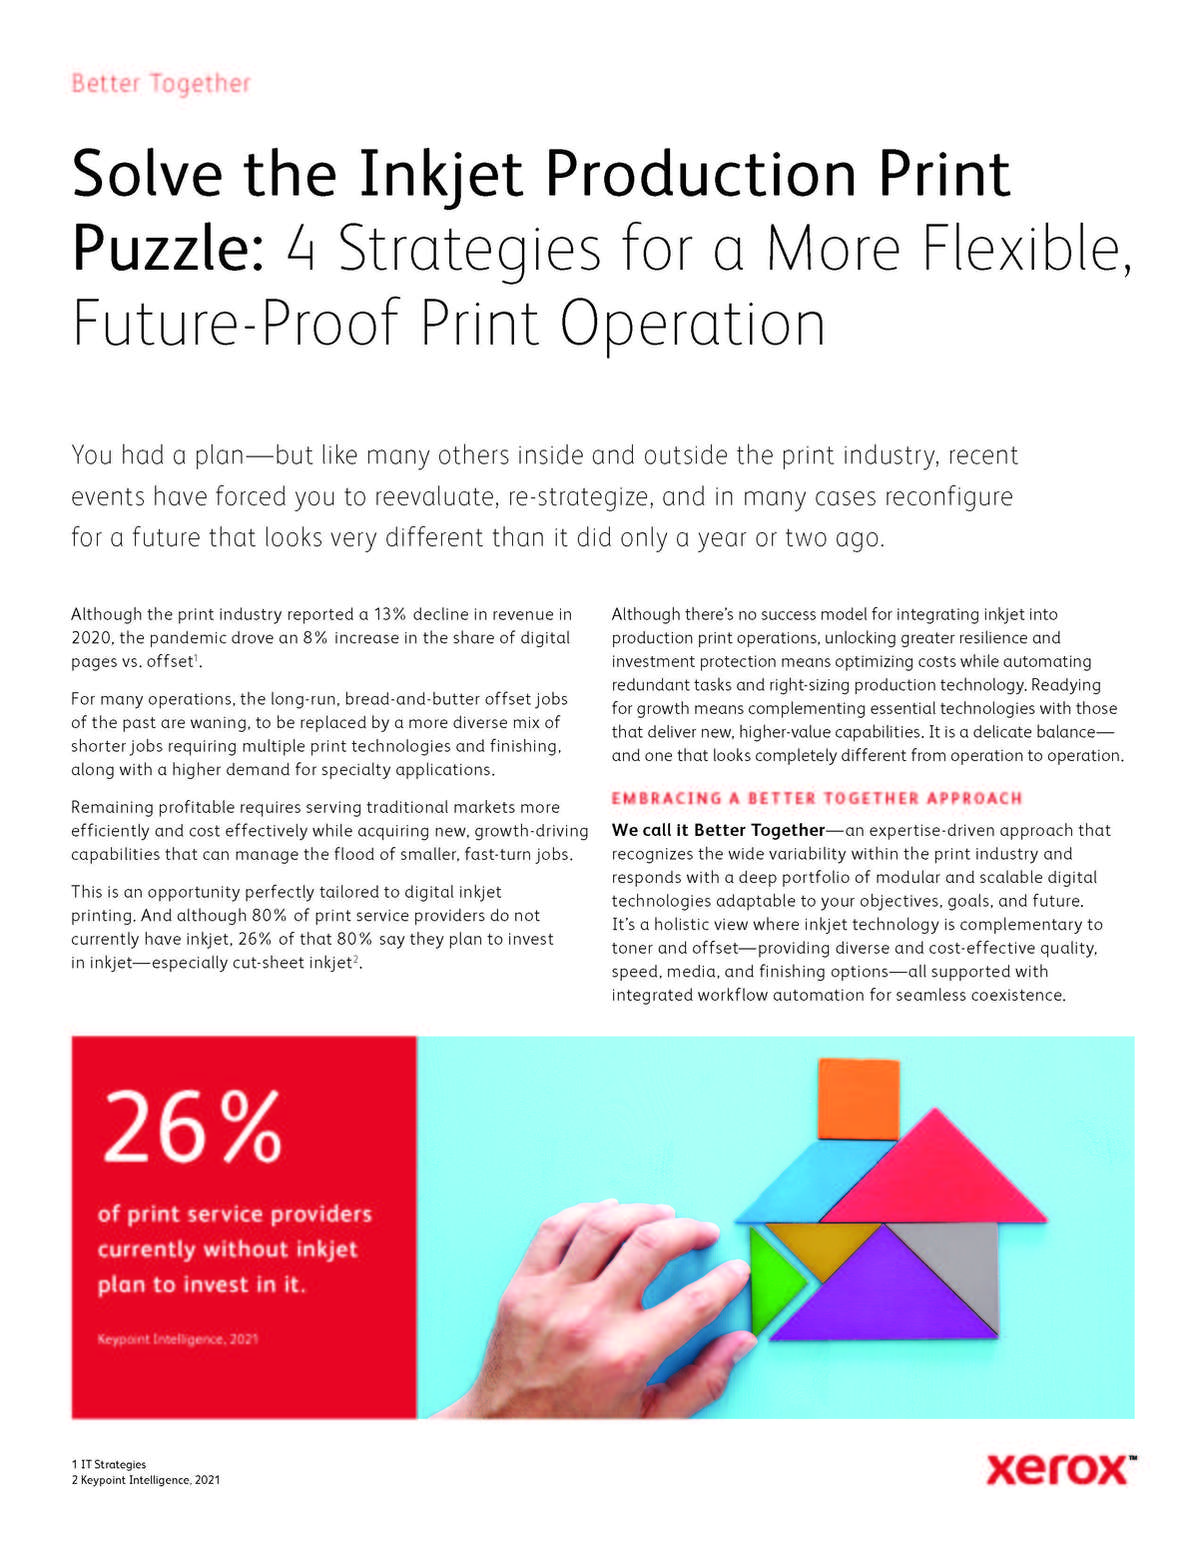 4 Strategies for a More Flexible, Future-Proof Print Operation